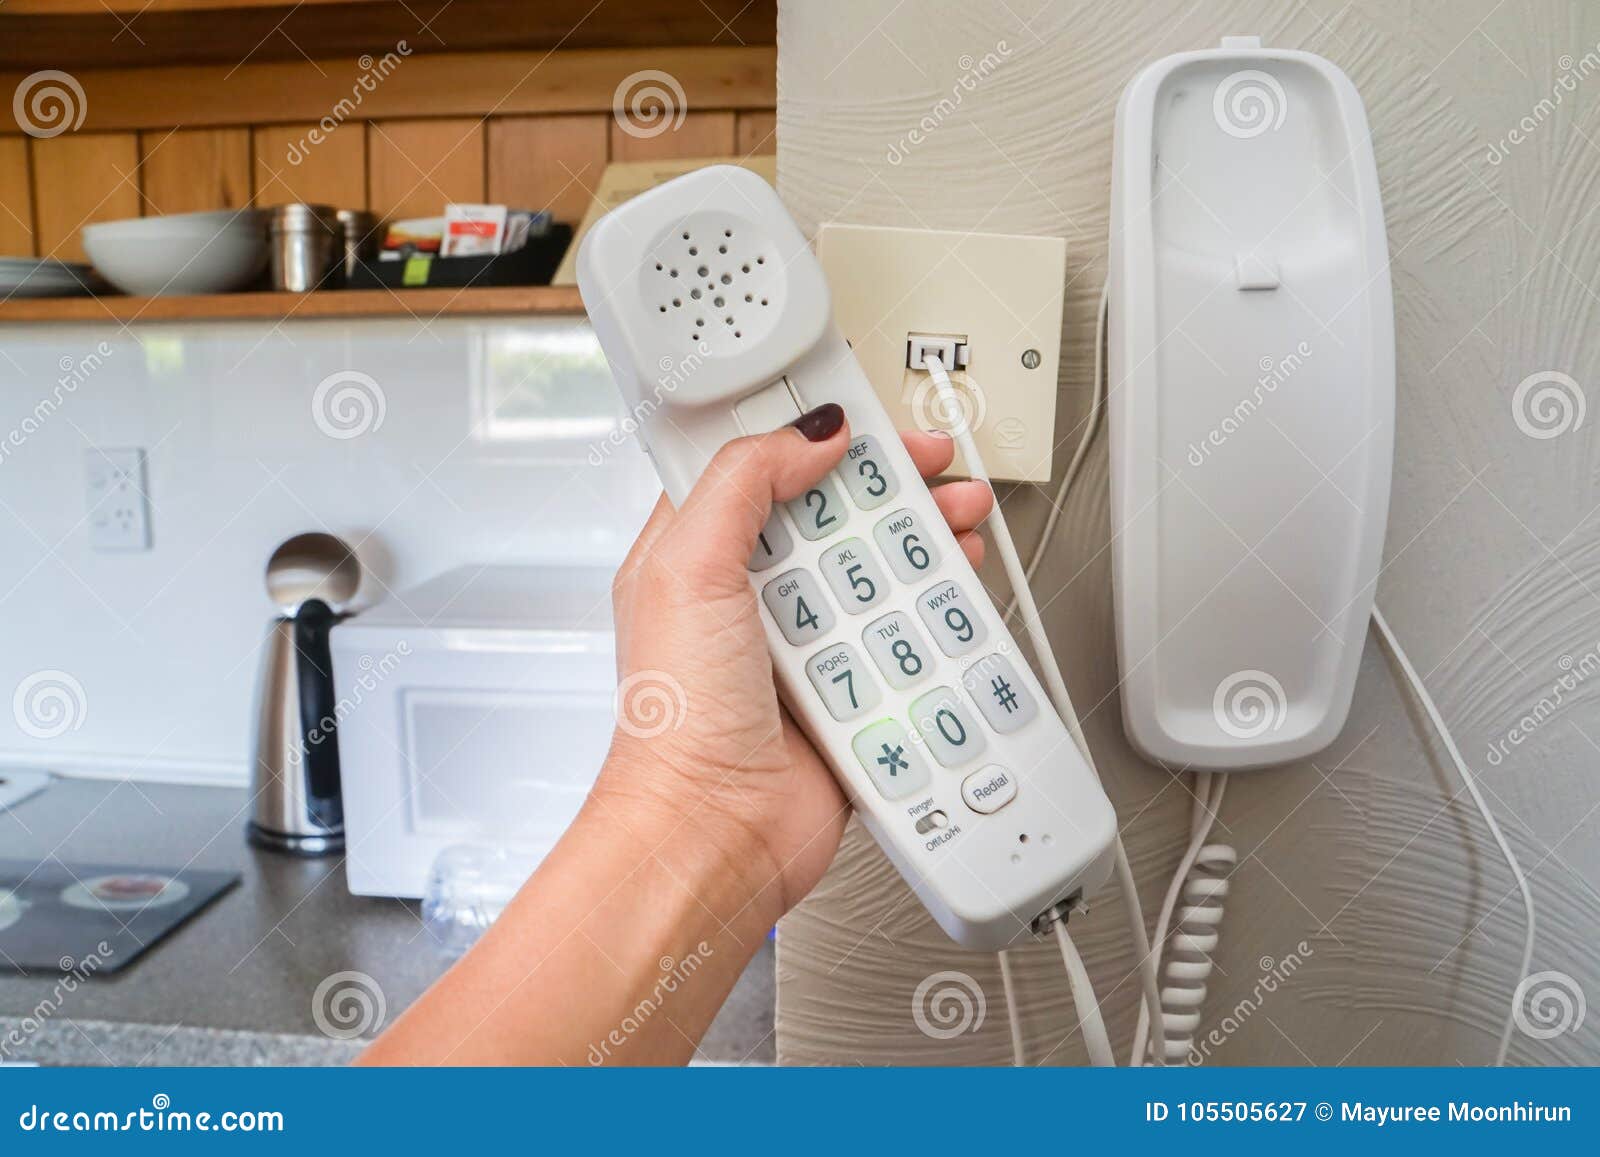 woman hold landline telephone at the house wall